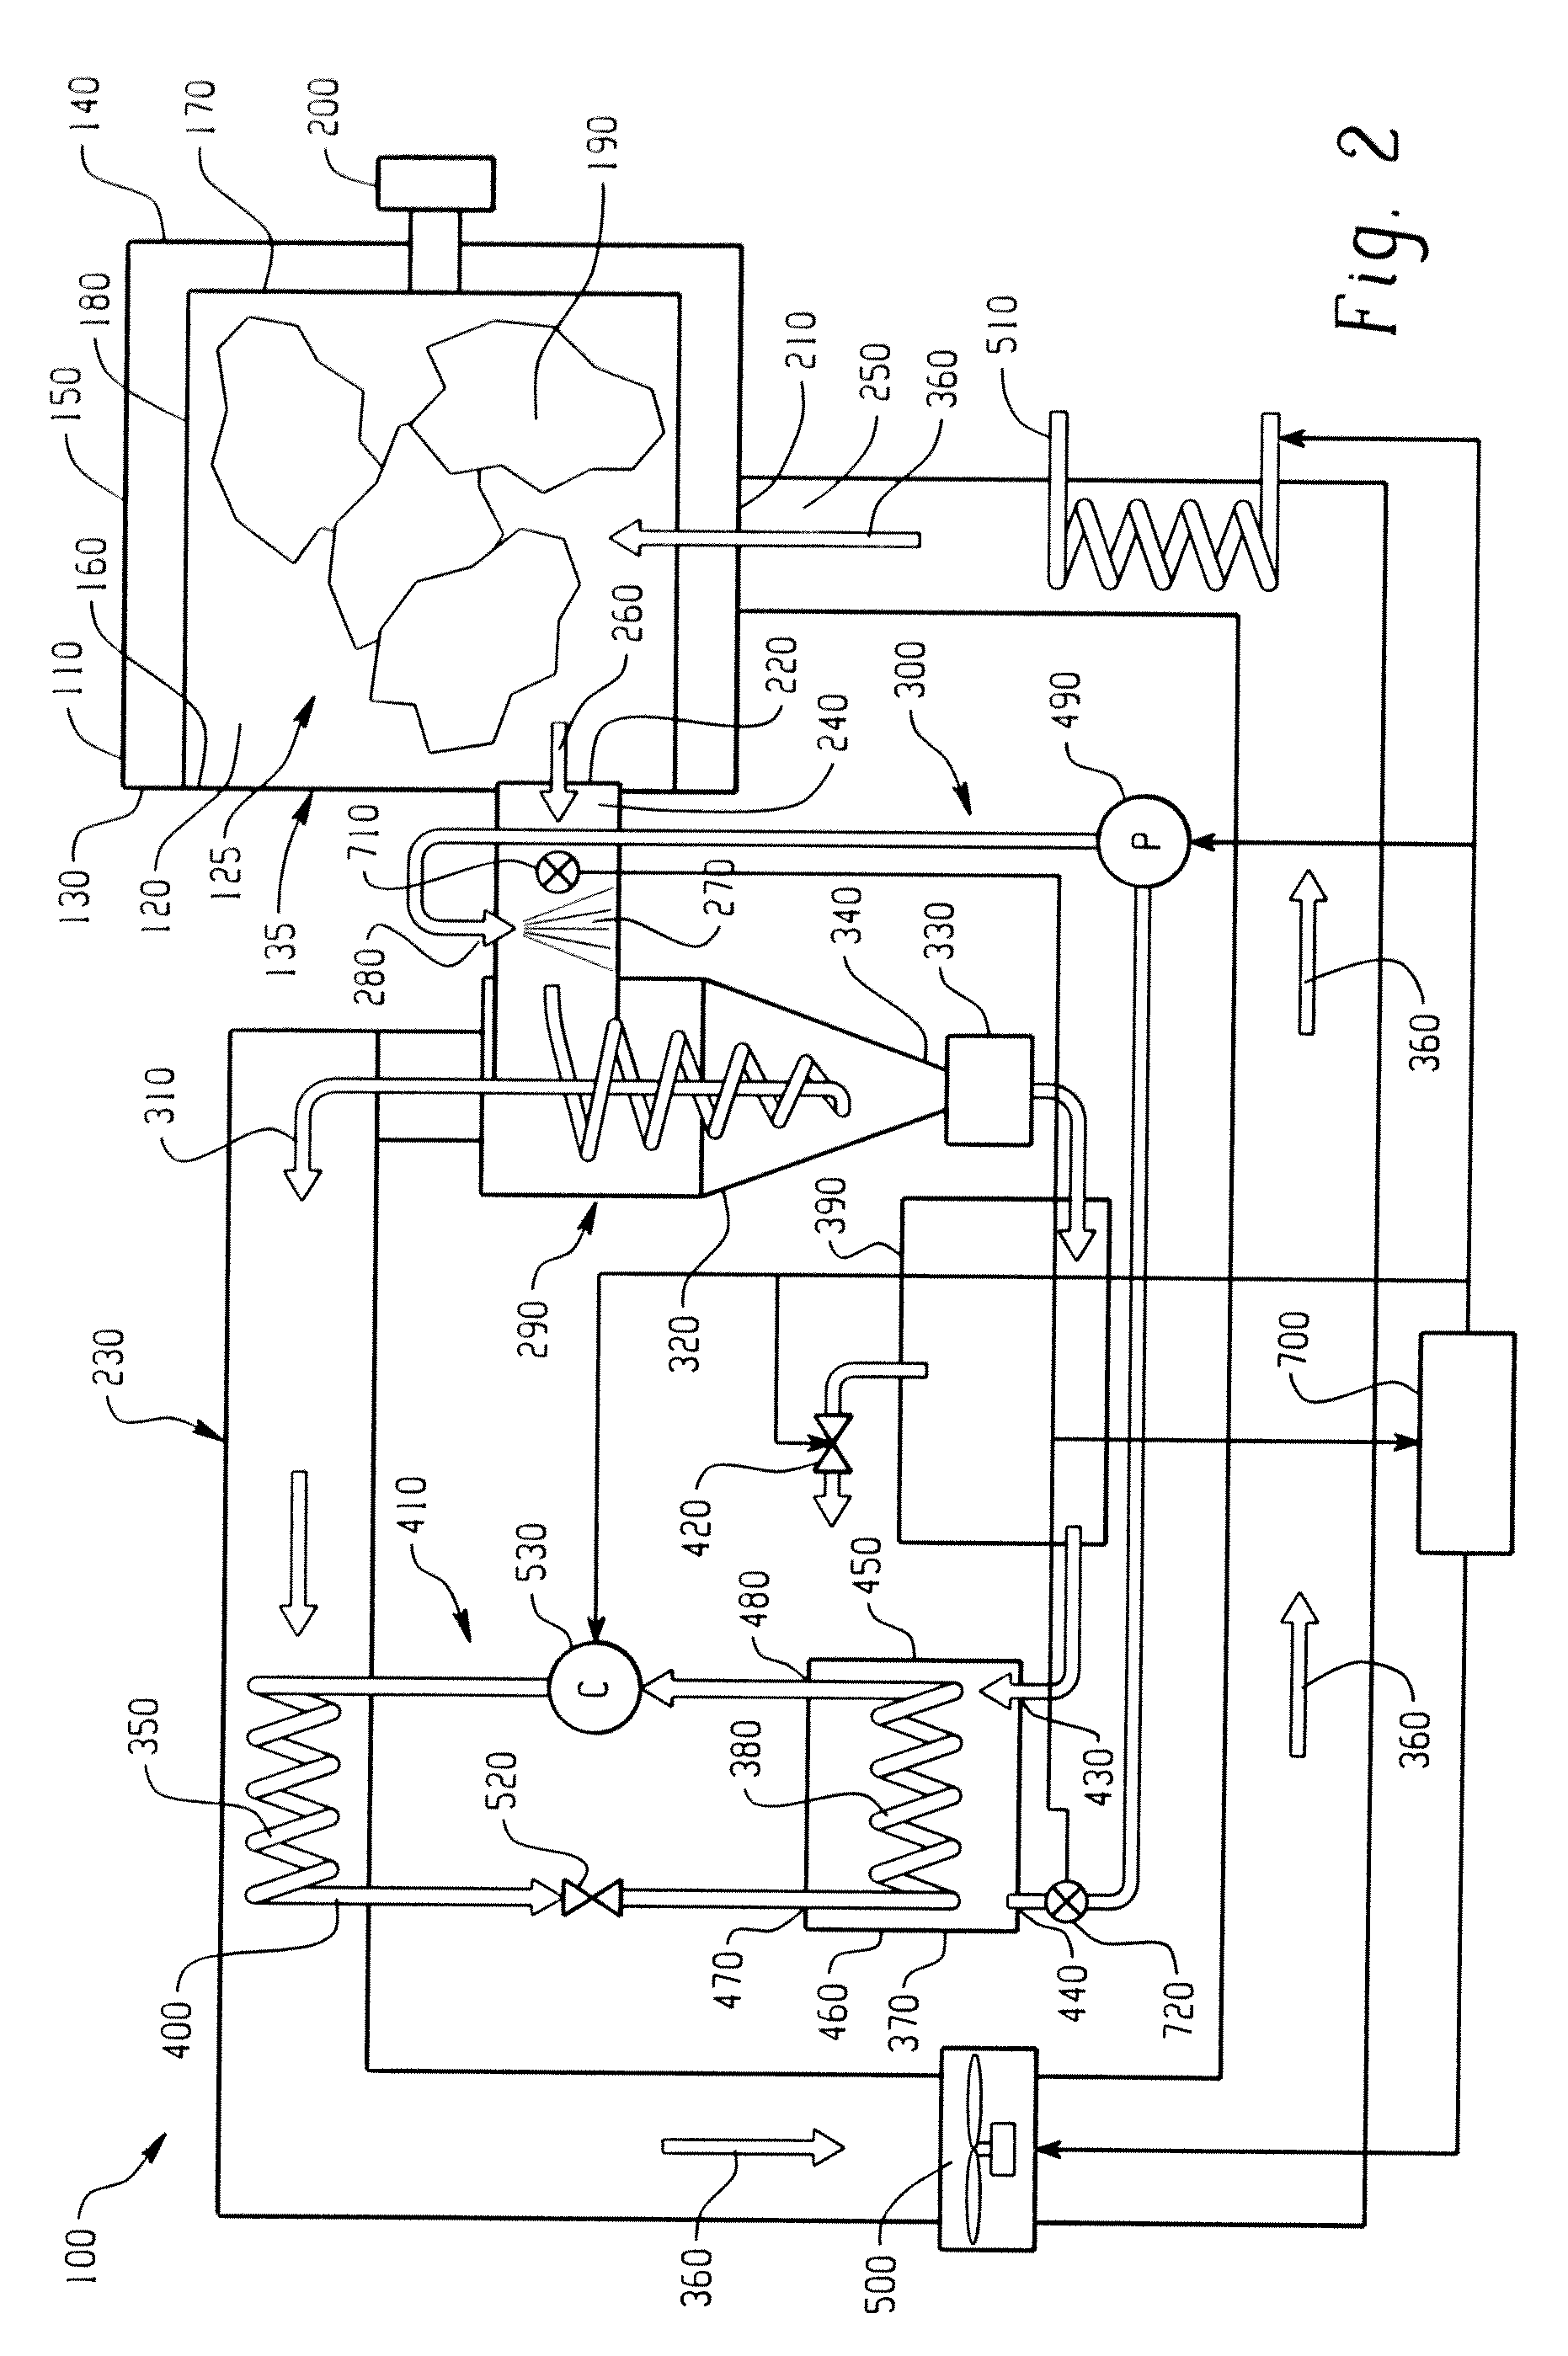 Device and method for heat pump based clothes dryer